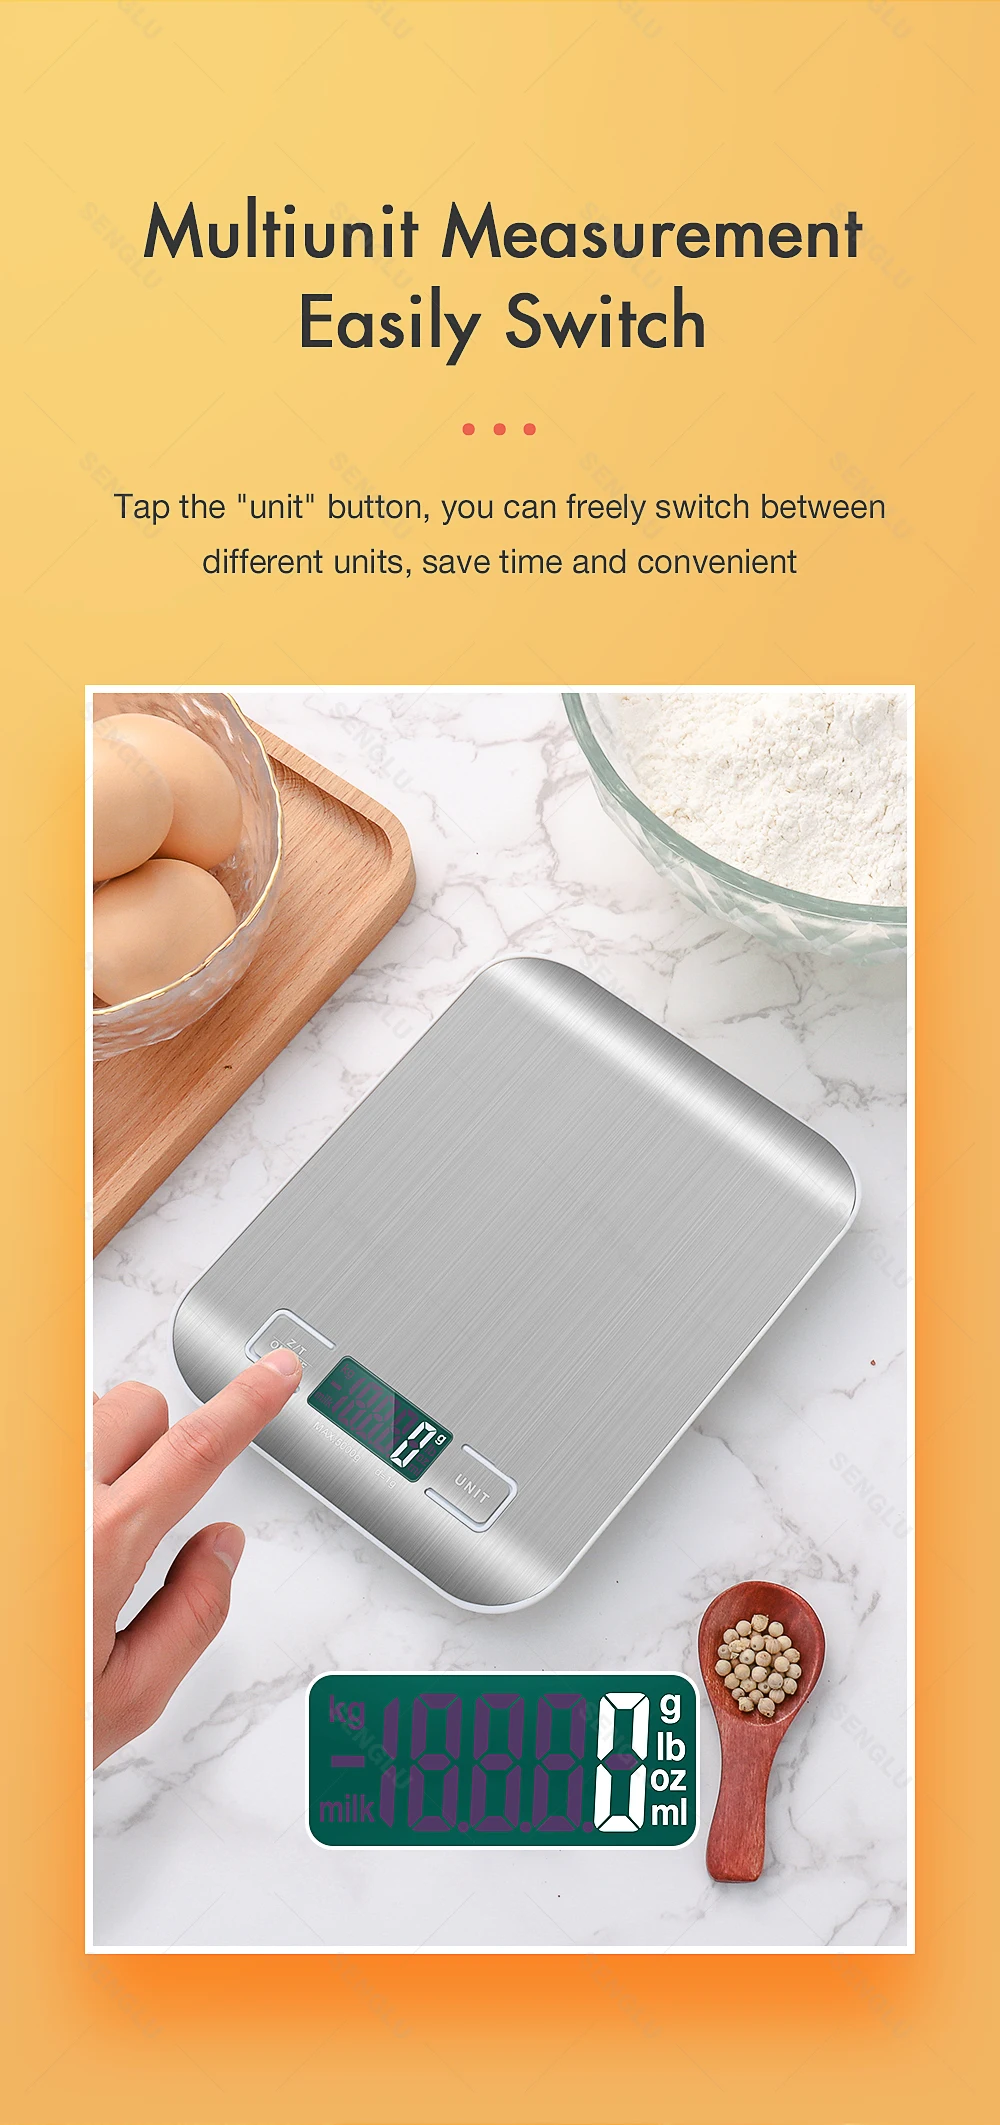 https://ae01.alicdn.com/kf/Sf929ac96aecc473f89950ebc8070619ct/Kitchen-Scale-With-LCD-Display-Digital-Food-Scale-Weight-Grams-and-Oz-for-Weight-Loss-Cooking.jpg